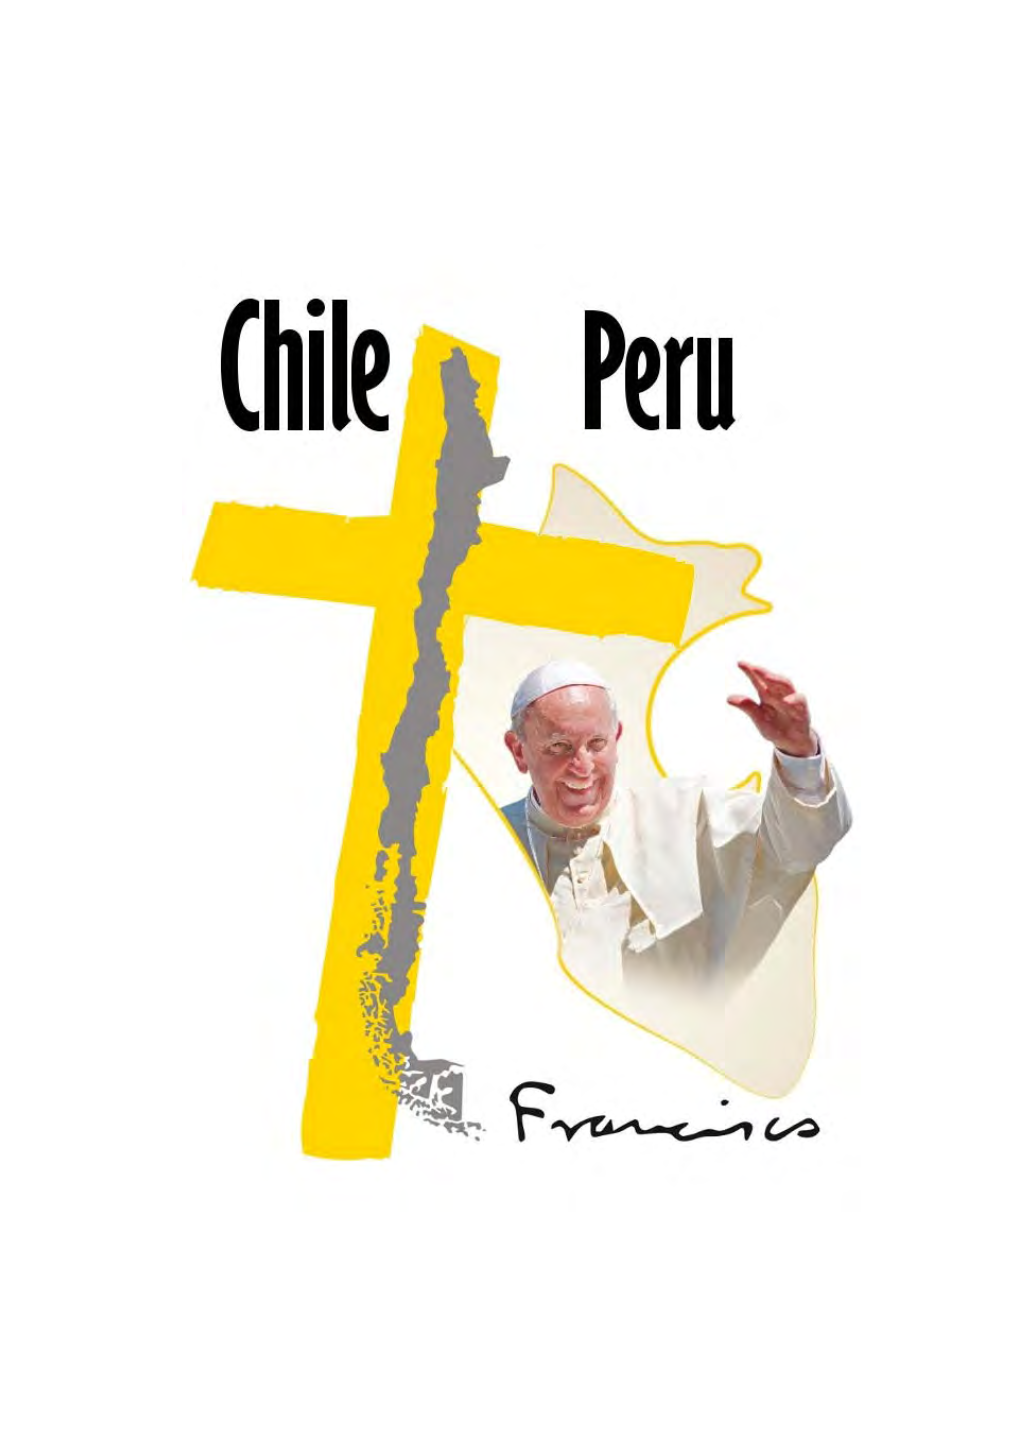 Pope Francis in Chile and Peru